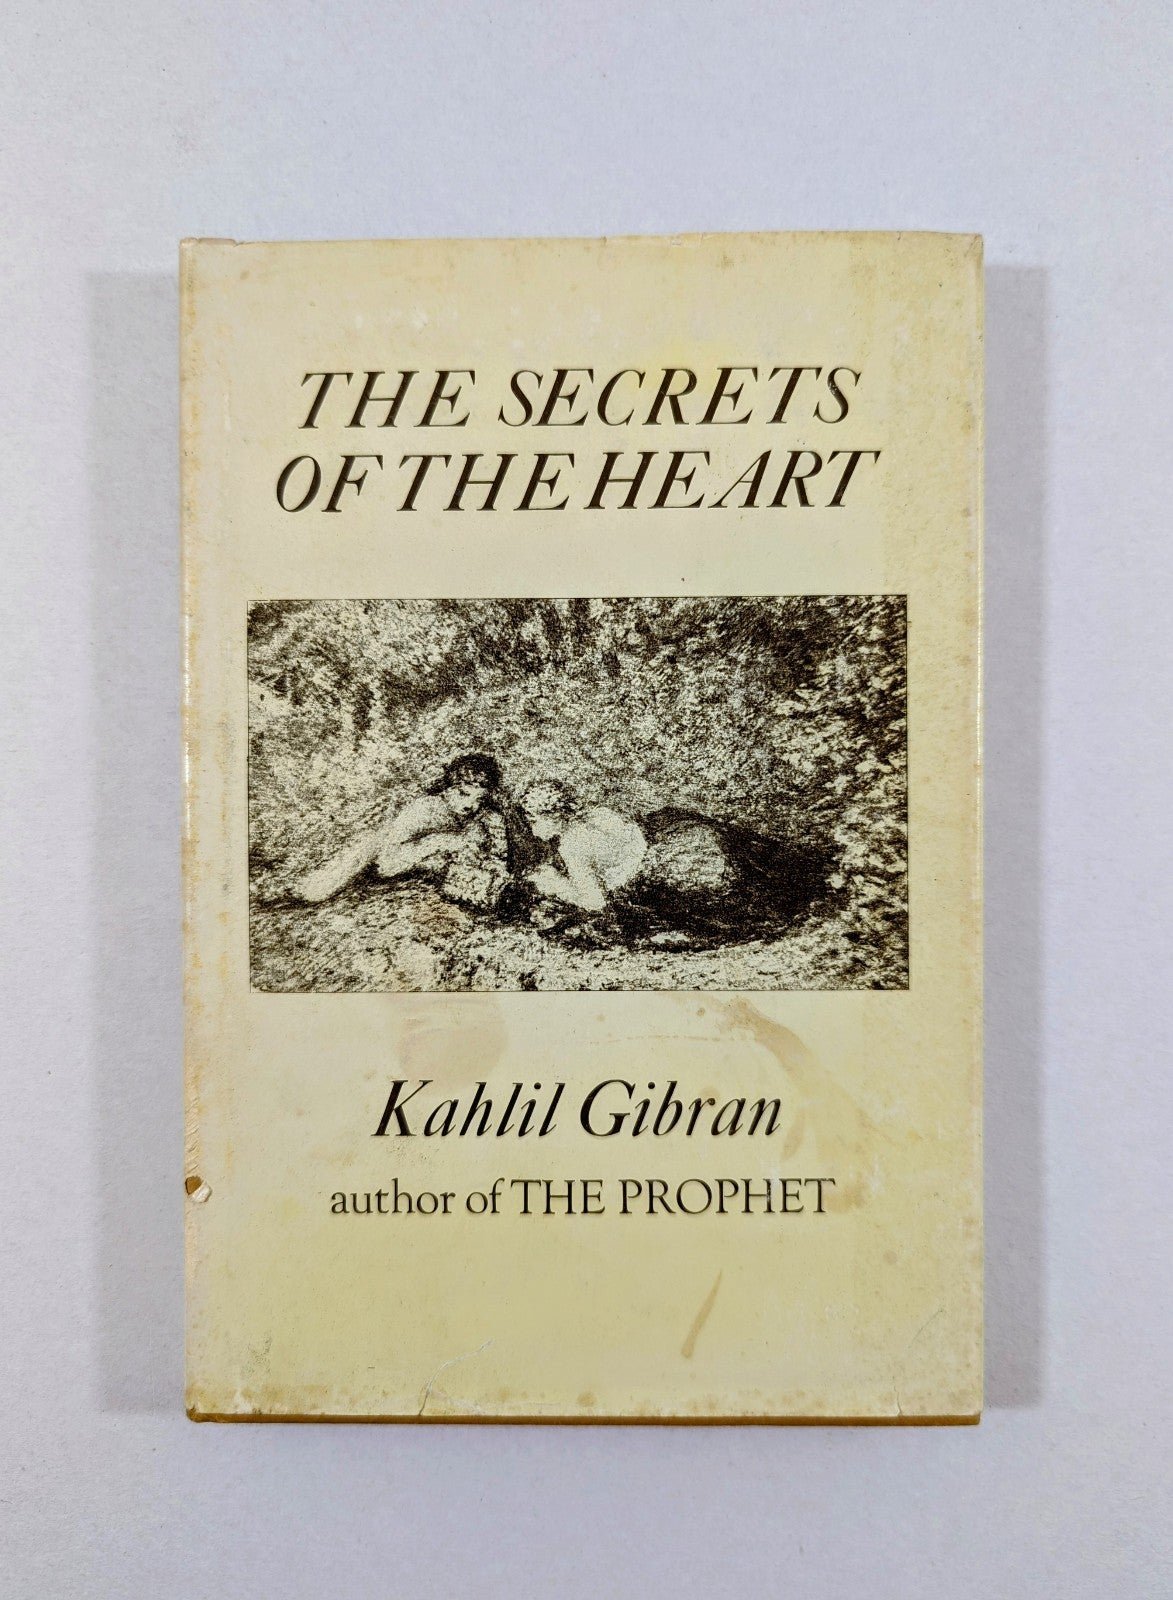 The Secrets of the Heart by Kahlil Gibran (1971) Hardcover with Dust Jacket 9Z4Sk1gDn